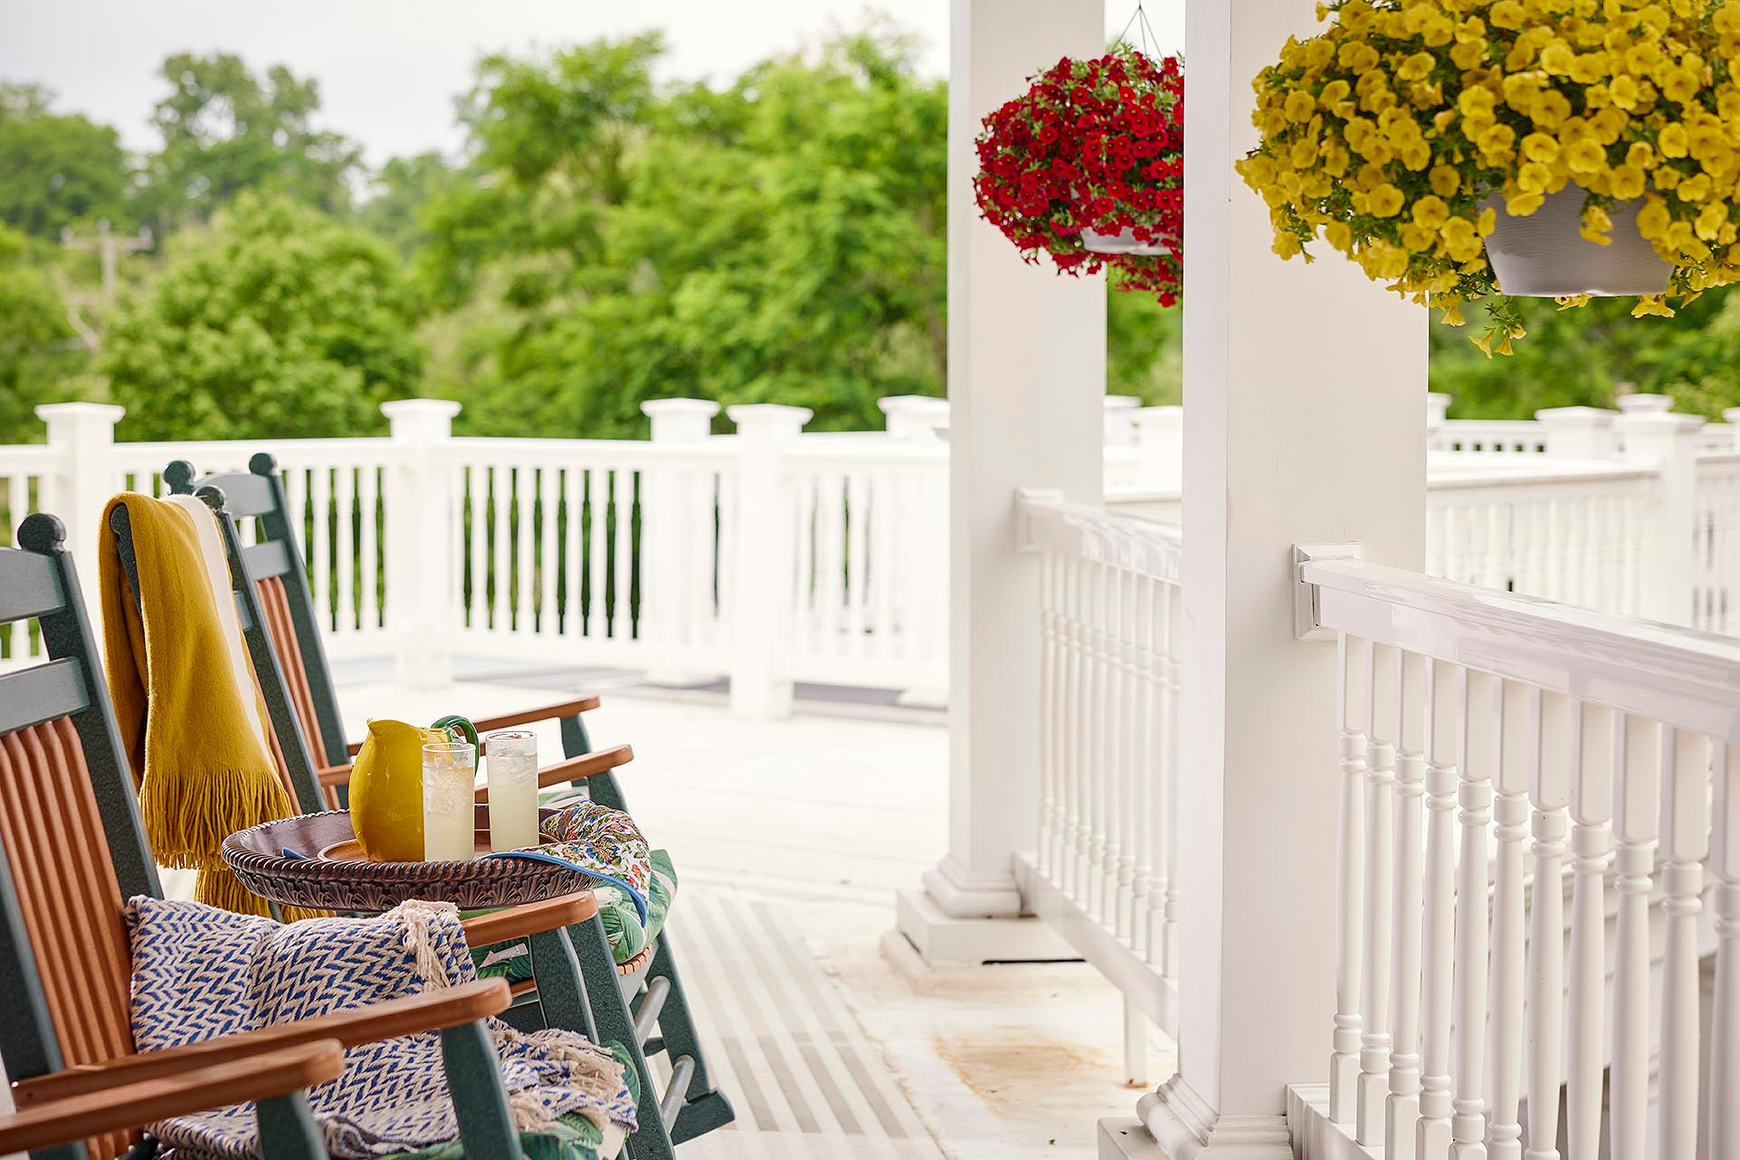 Rock away the afternoon while sipping lemonade on the front porch